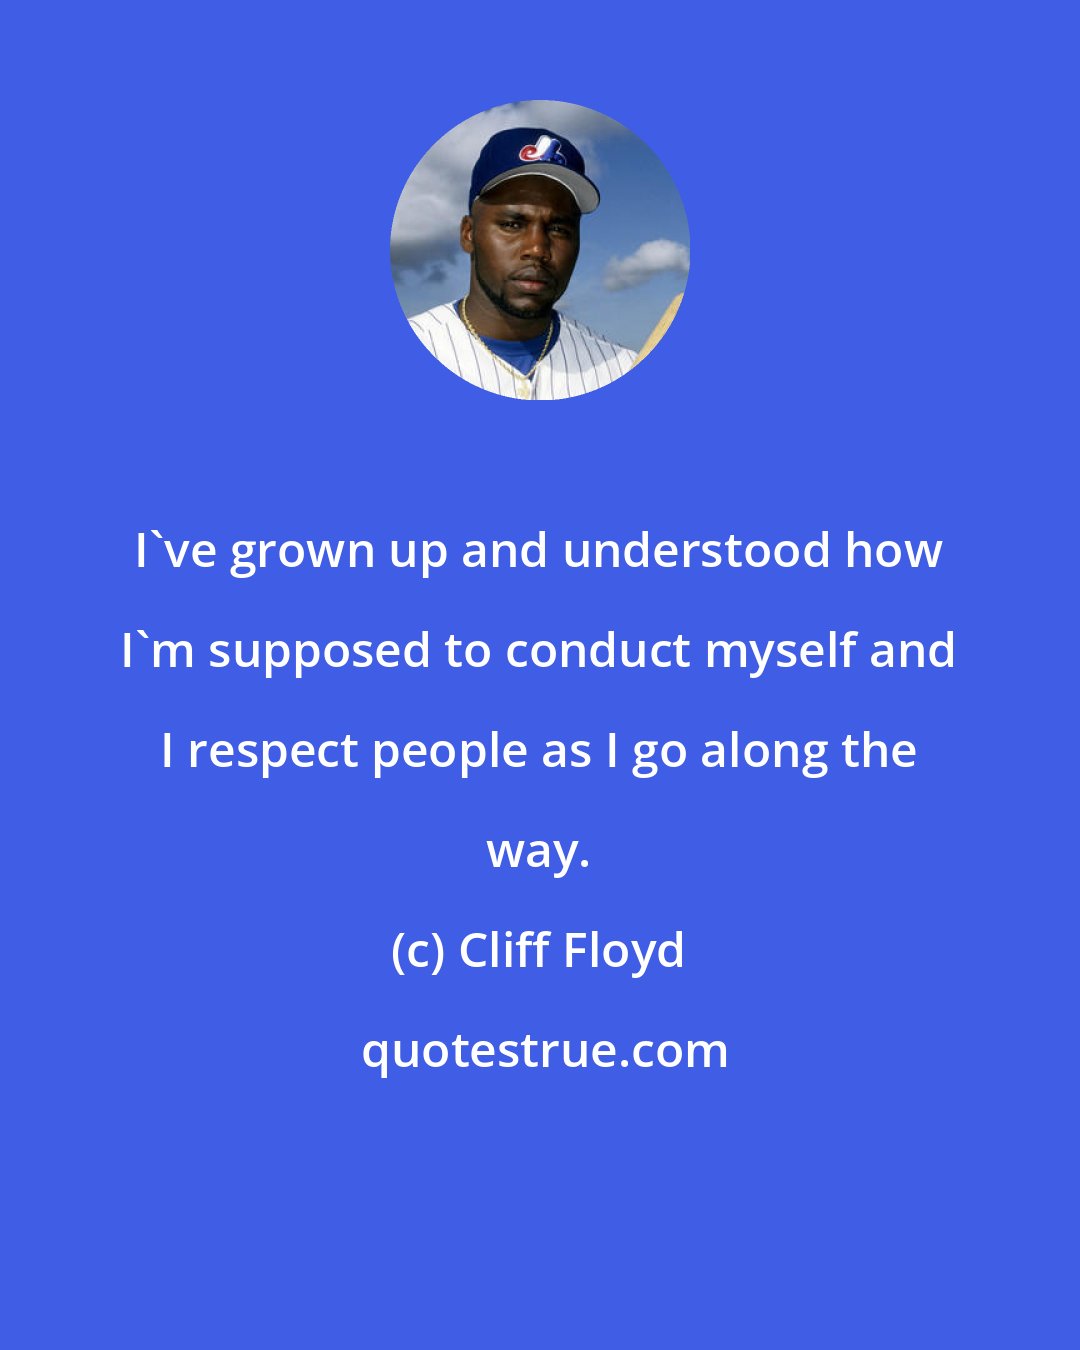 Cliff Floyd: I've grown up and understood how I'm supposed to conduct myself and I respect people as I go along the way.